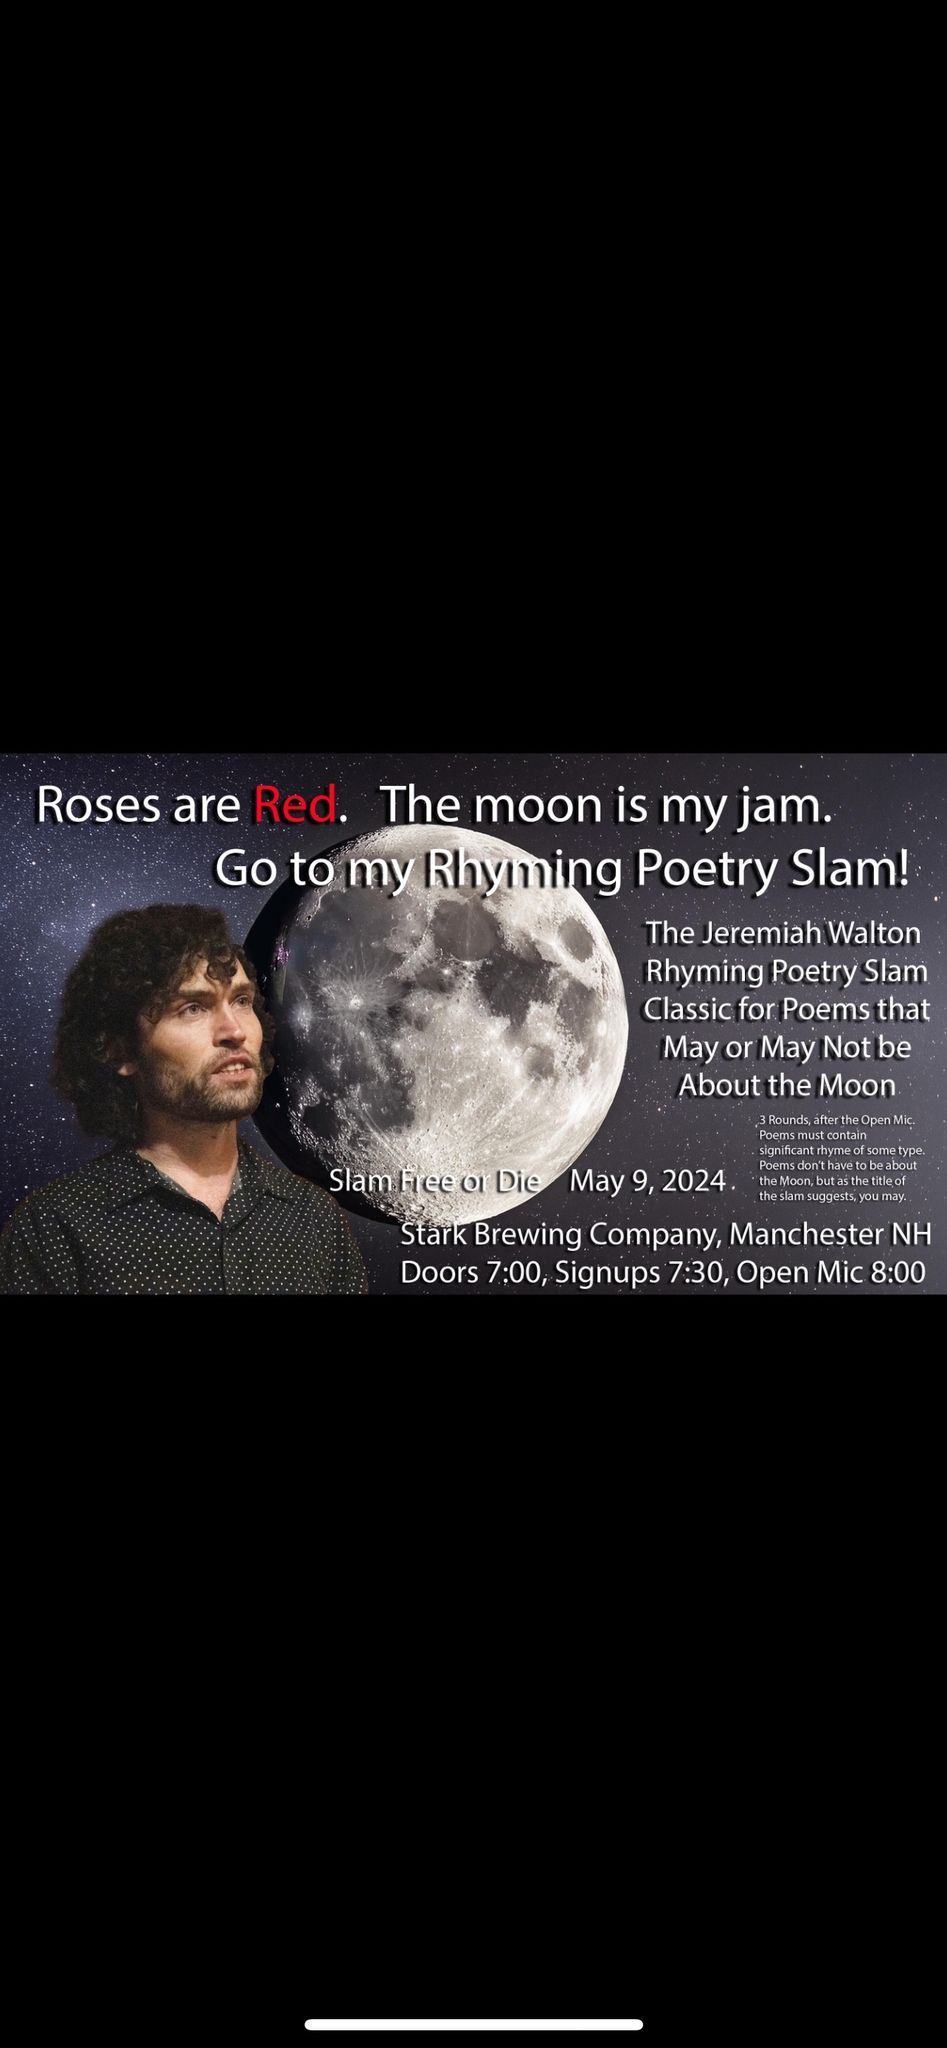 Slam Free Or Die Presents: the Jeremiah Walton Rhyming Poetry Slam -poems may\/not be about the Moon!